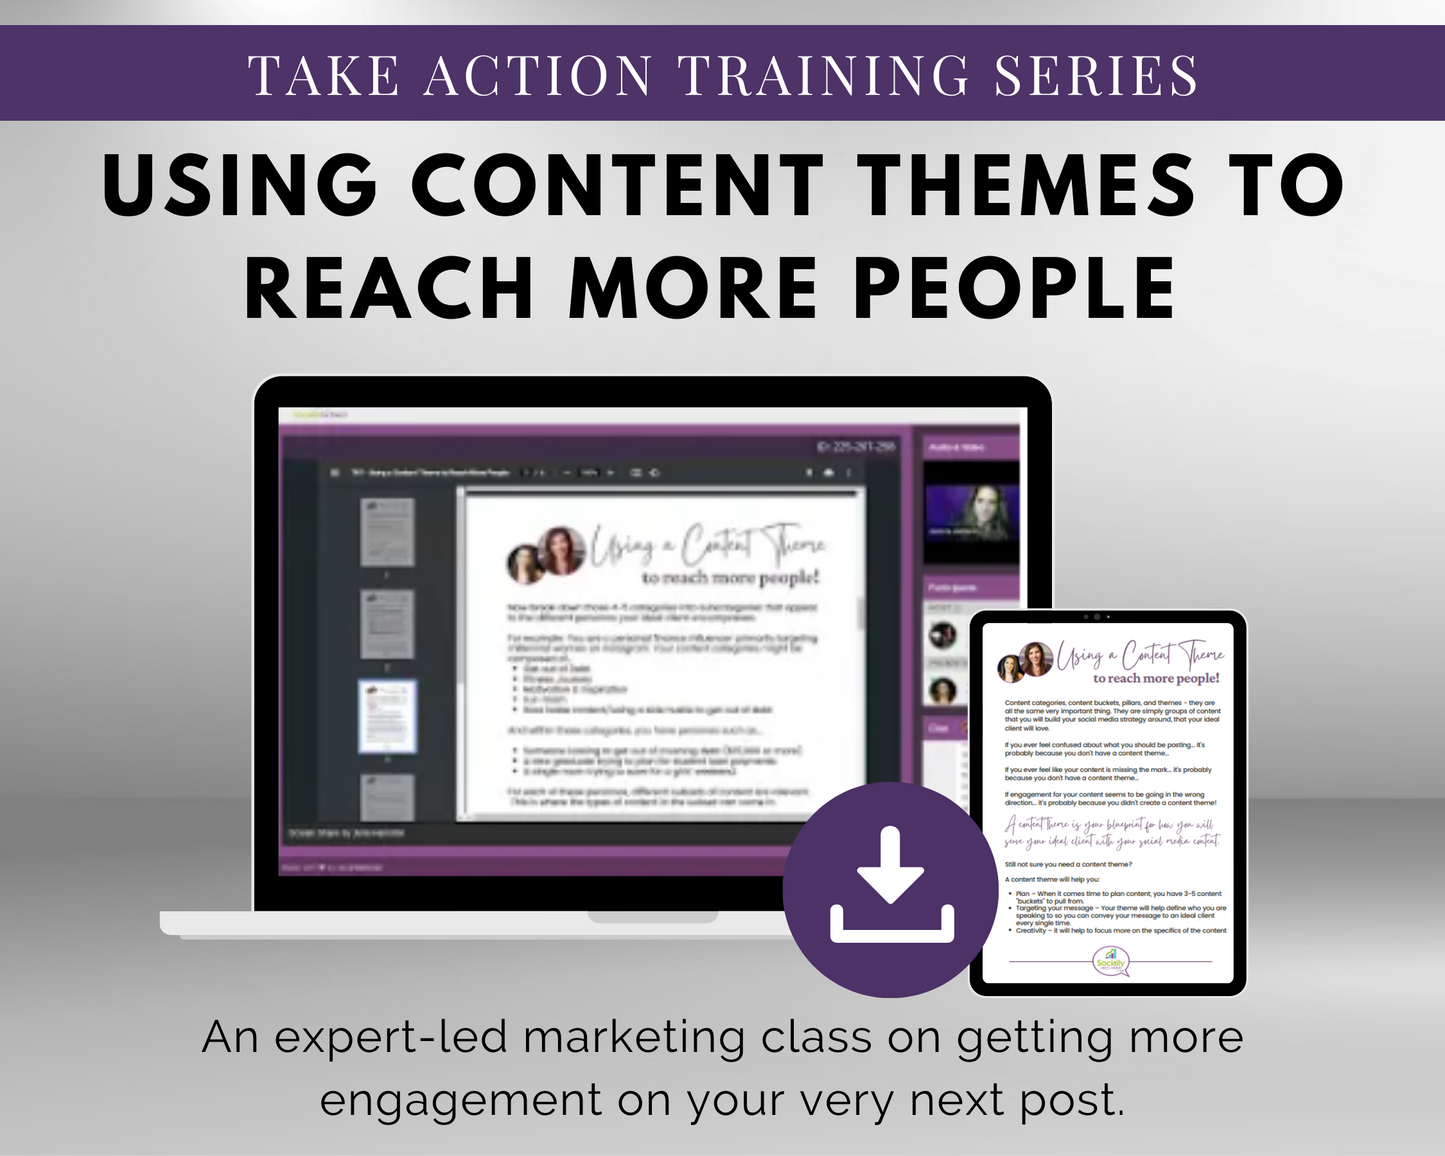 Take Get Socially Inclined's TAT - Using Content Themes to Reach More People Masterclass training series to reach more people.